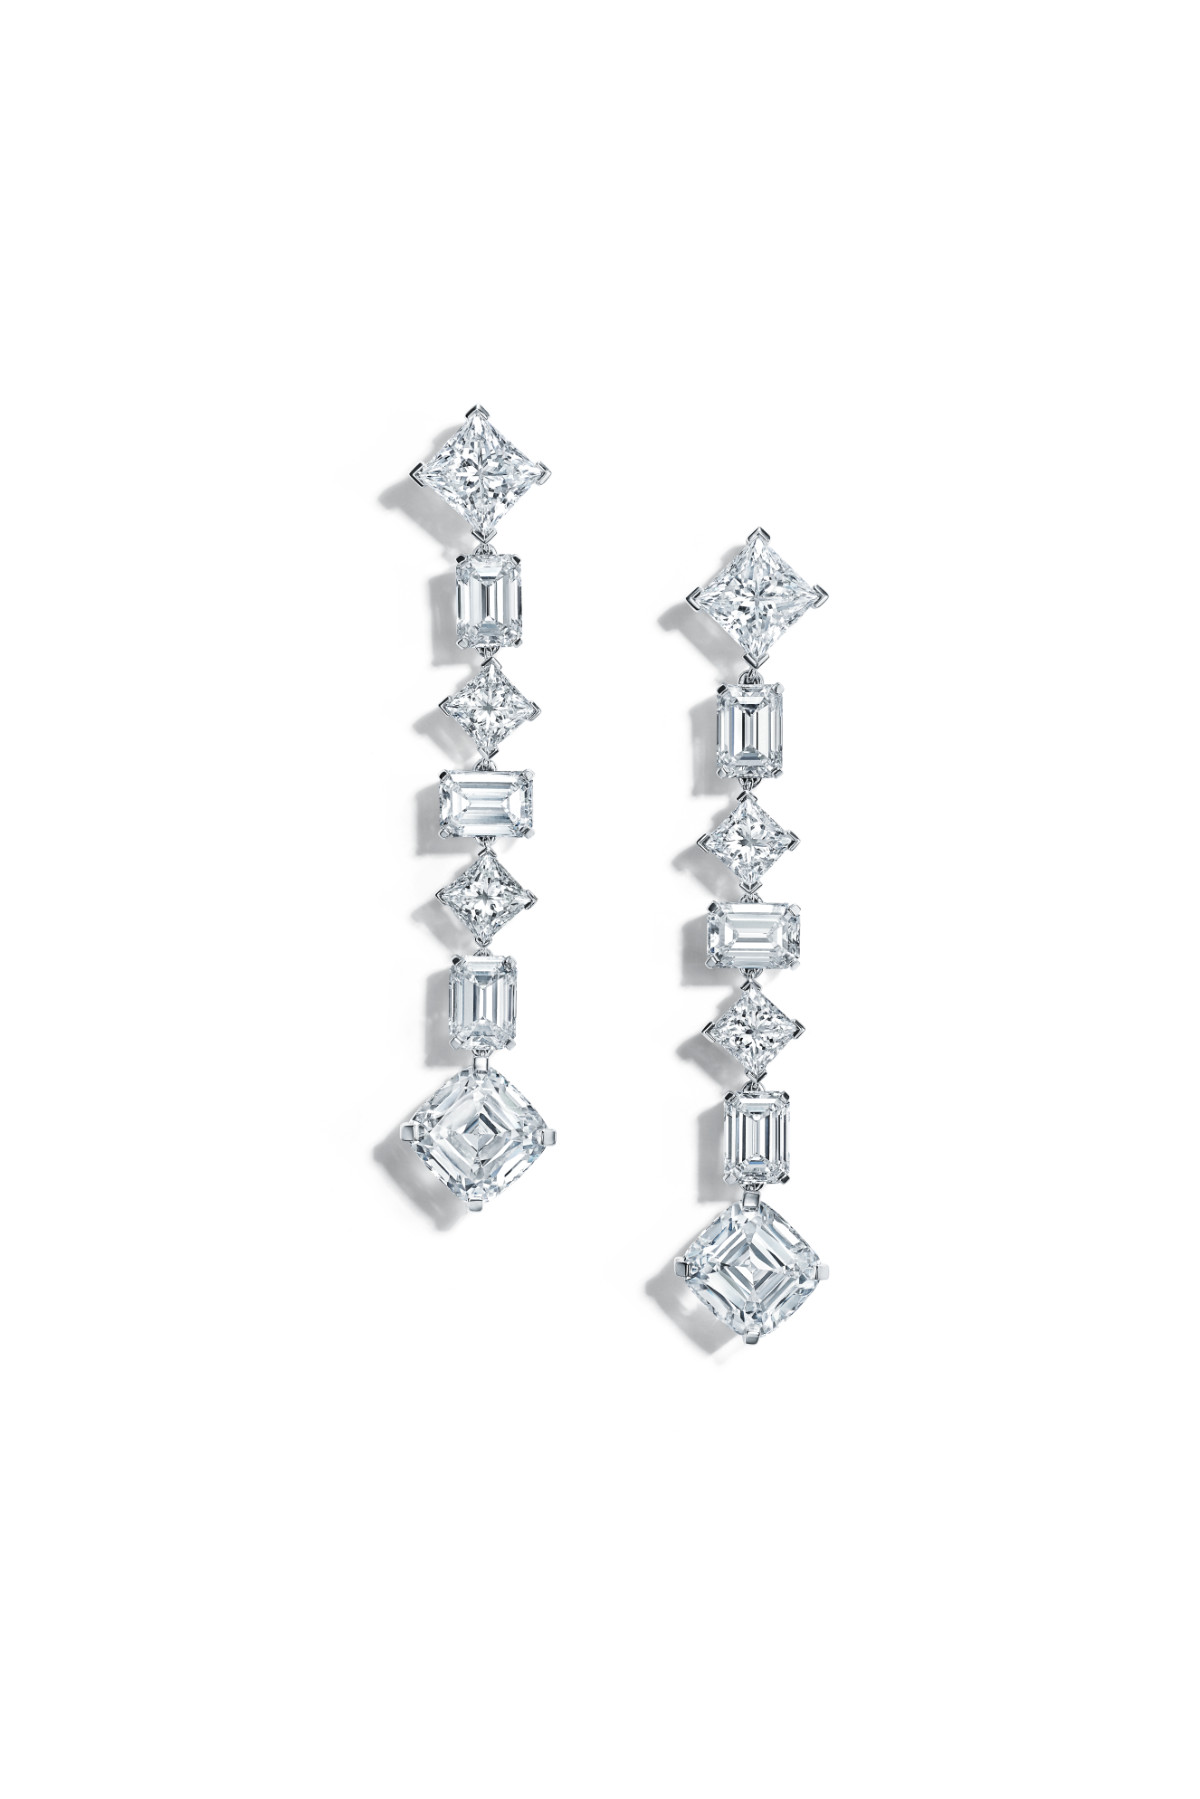 Tiffany & Co. unveils 2020 high jewelry collection, Extraordinary Tiffany